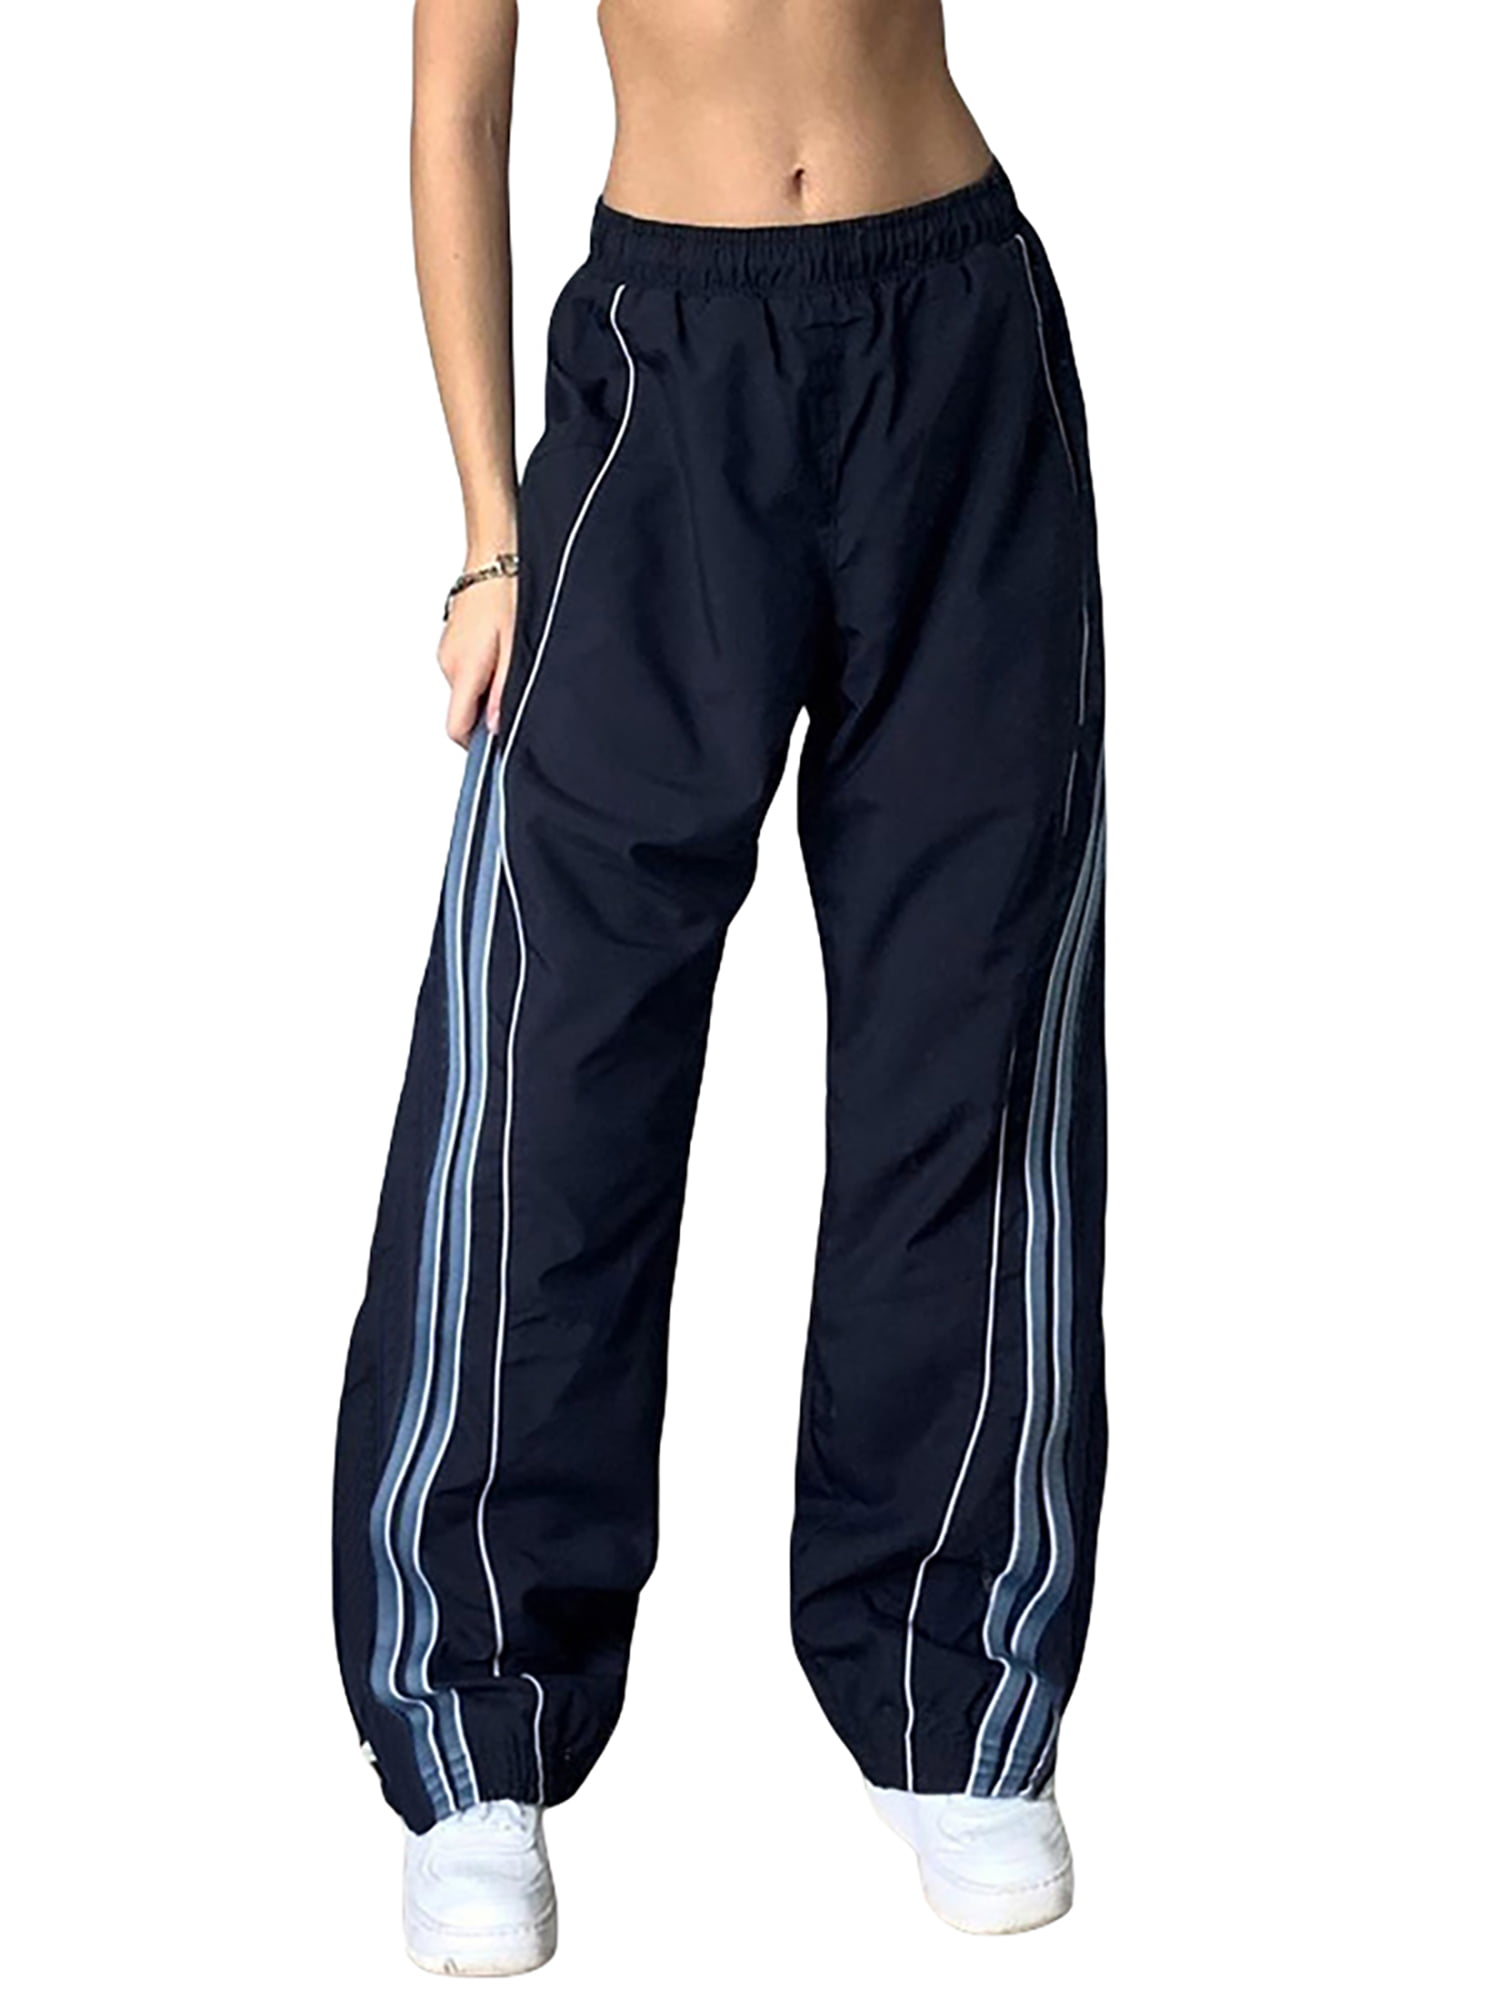 Adidas Tellpath S Track Pants Trousers - Buy Adidas Tellpath S Track Pants  Trousers online in India